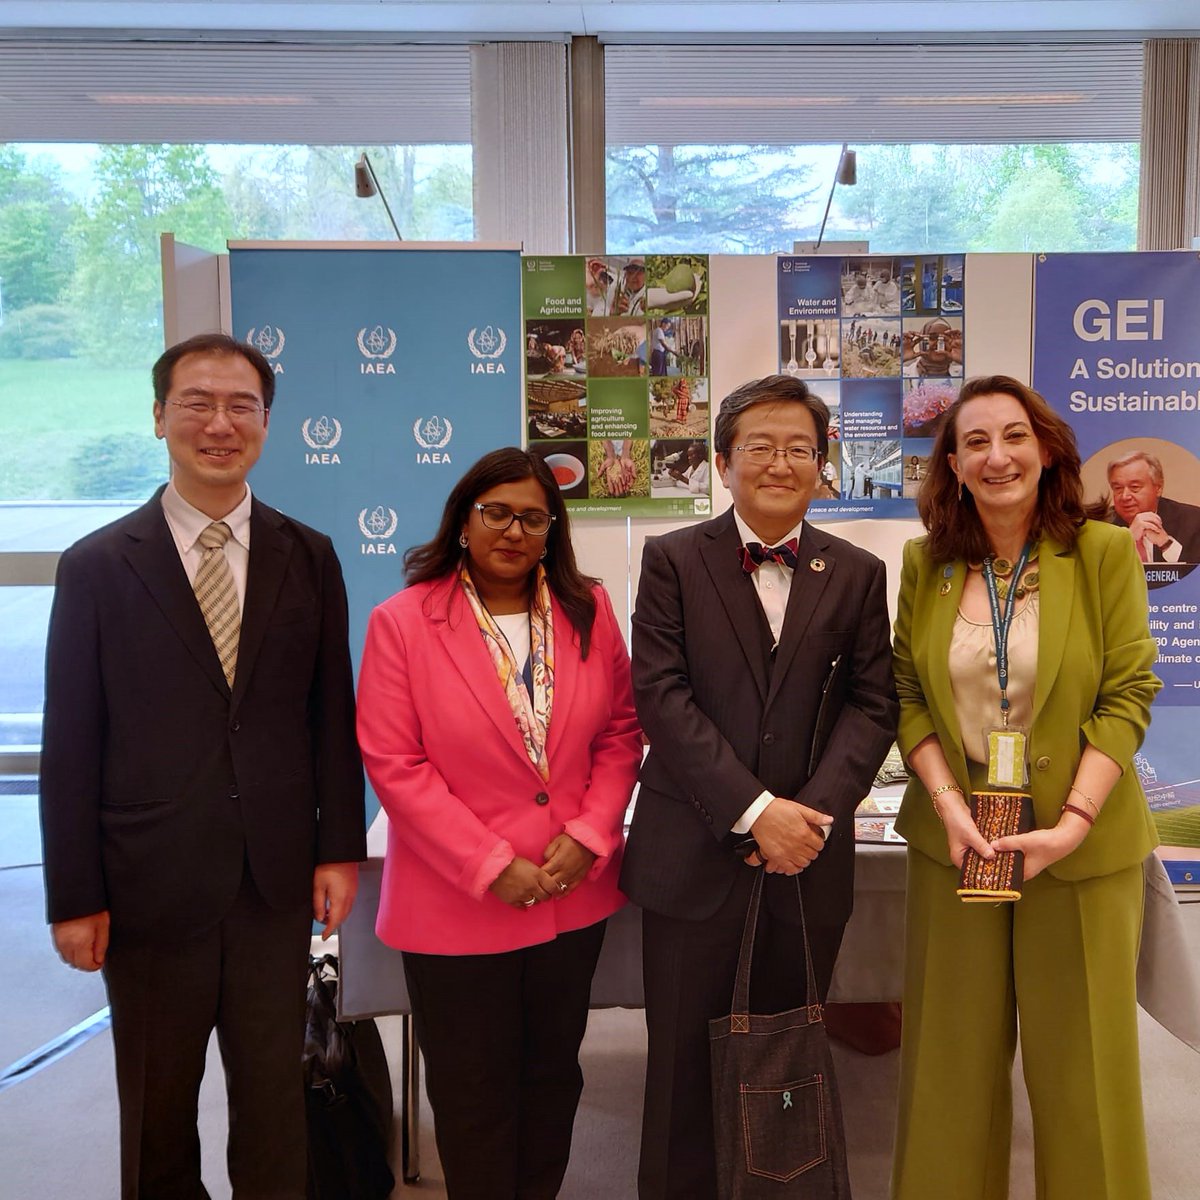 The IAEA exhibition at @UNCTAD #CSTD features information on @IAEAorg flagship initiatives, including #ZODIAC, #NUTECPlastics, #RaysofHope and #Atoms4Food.

🔗Learn more: tinyurl.com/iaeaflagship